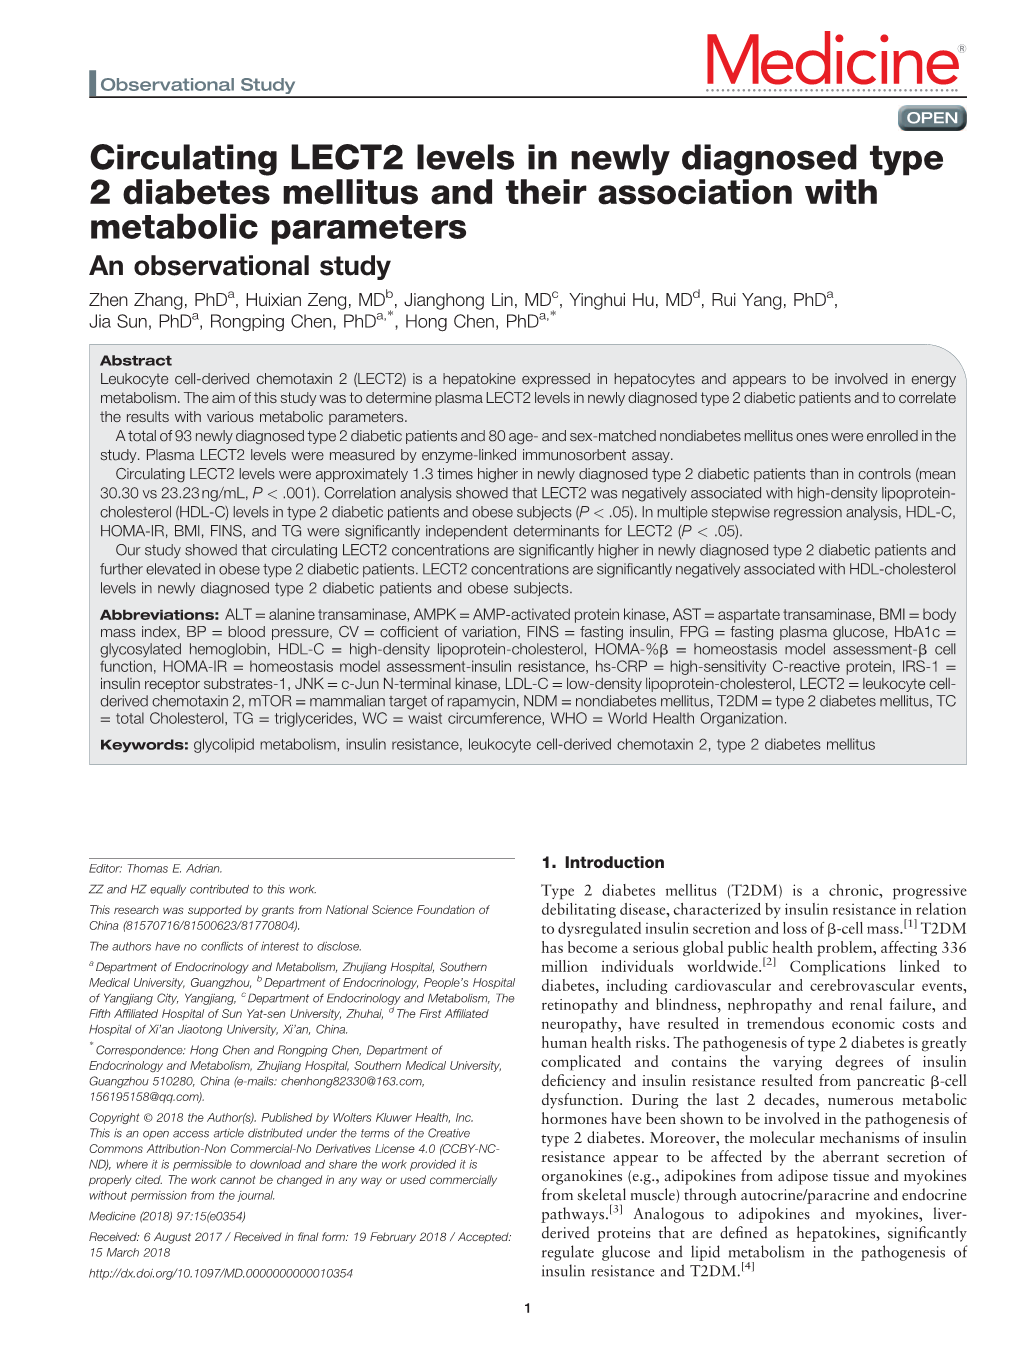 Circulating LECT2 Levels in Newly Diagnosed Type 2 Diabetes Mellitus